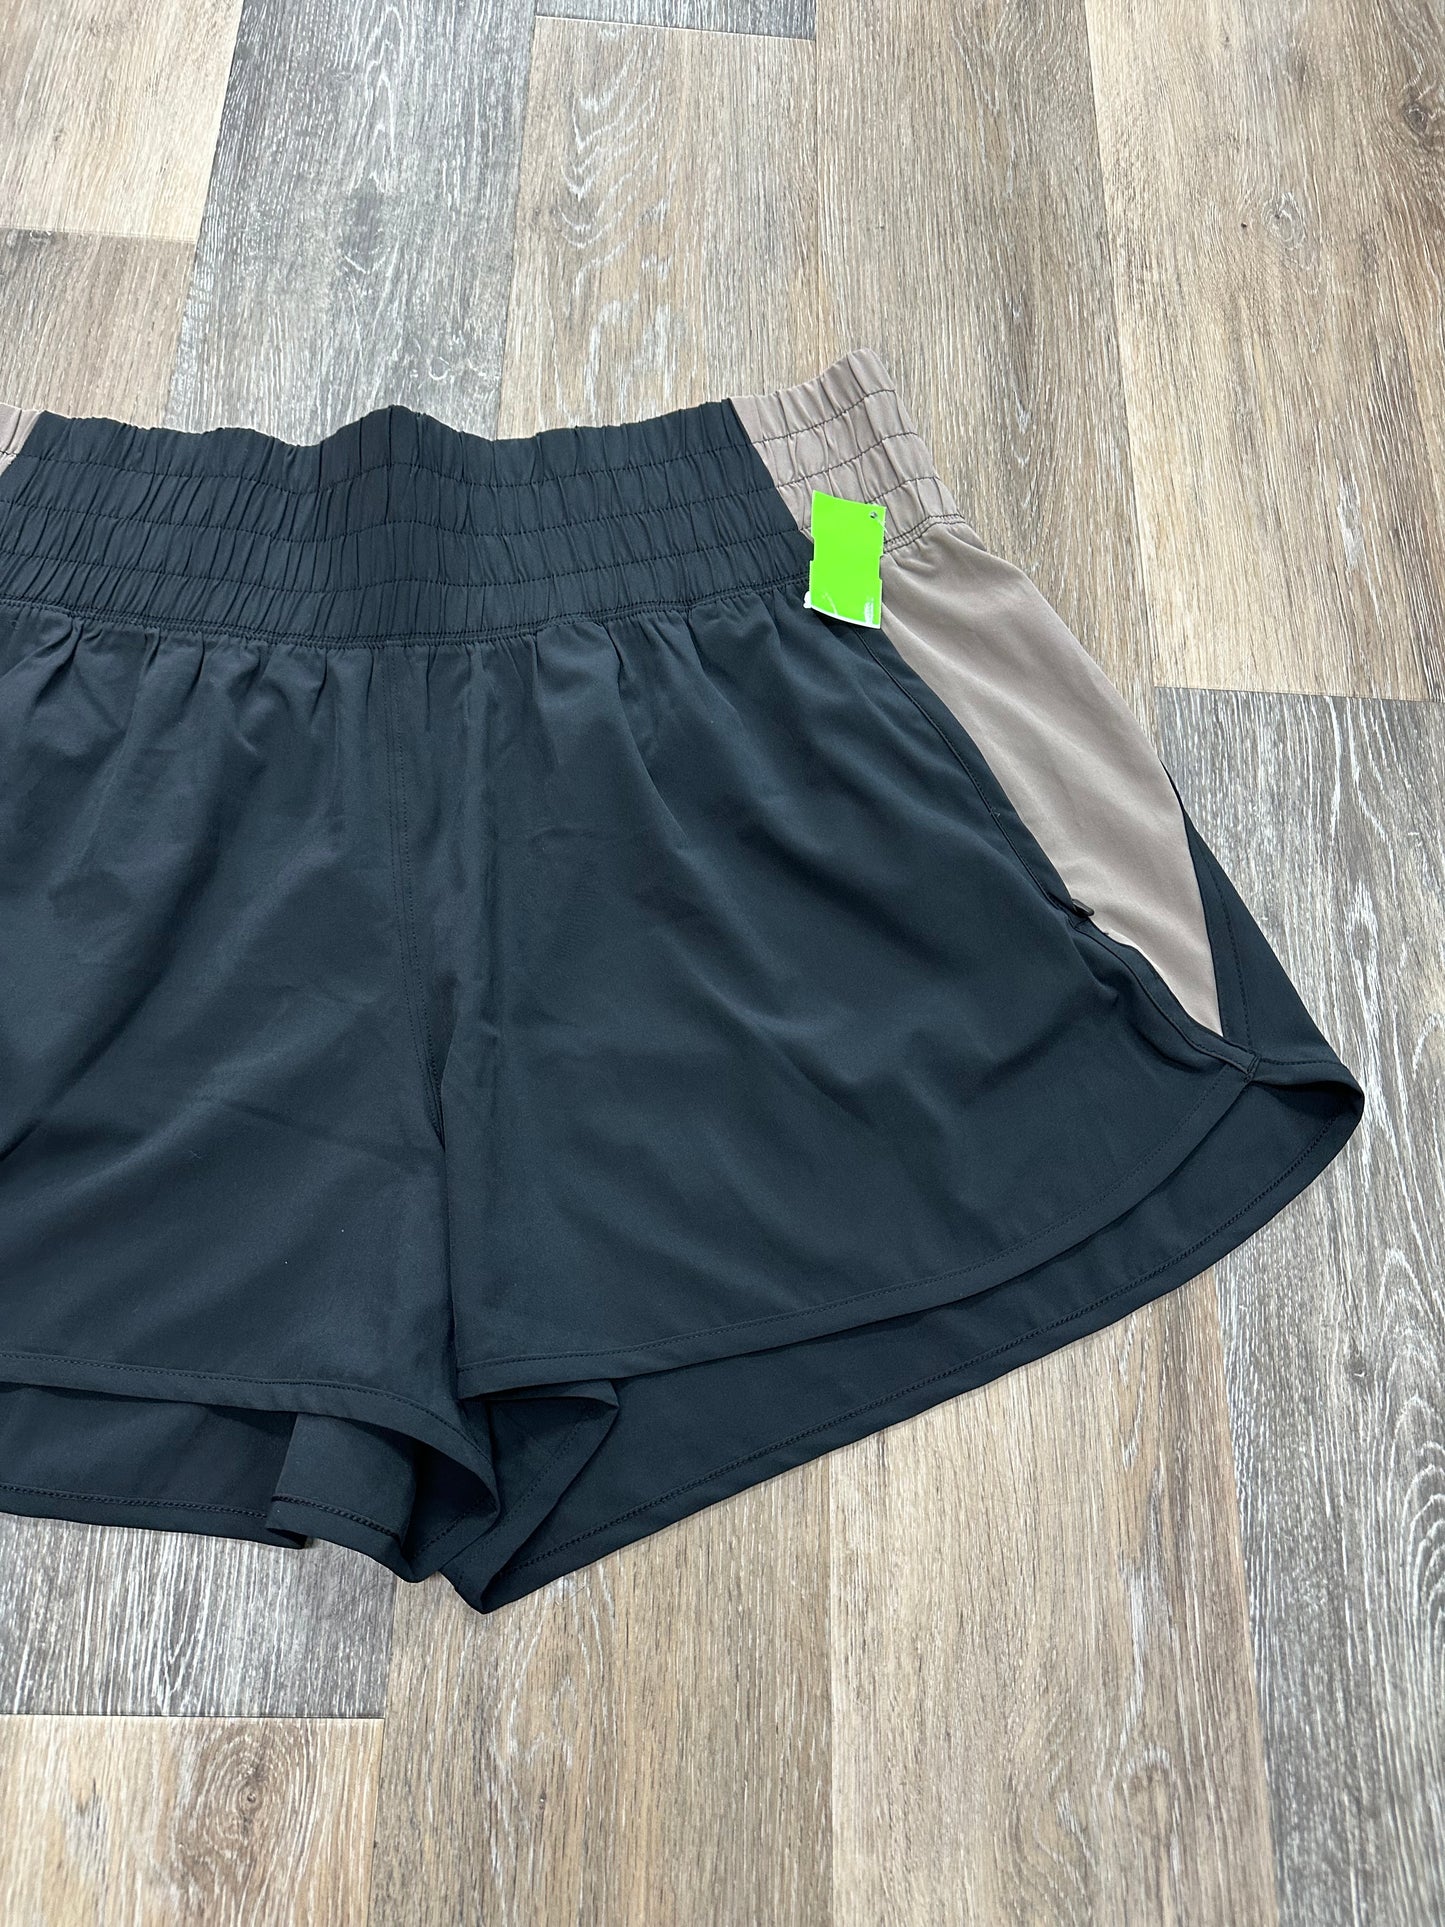 Athletic Shorts By Abercrombie And Fitch  Size: Xl